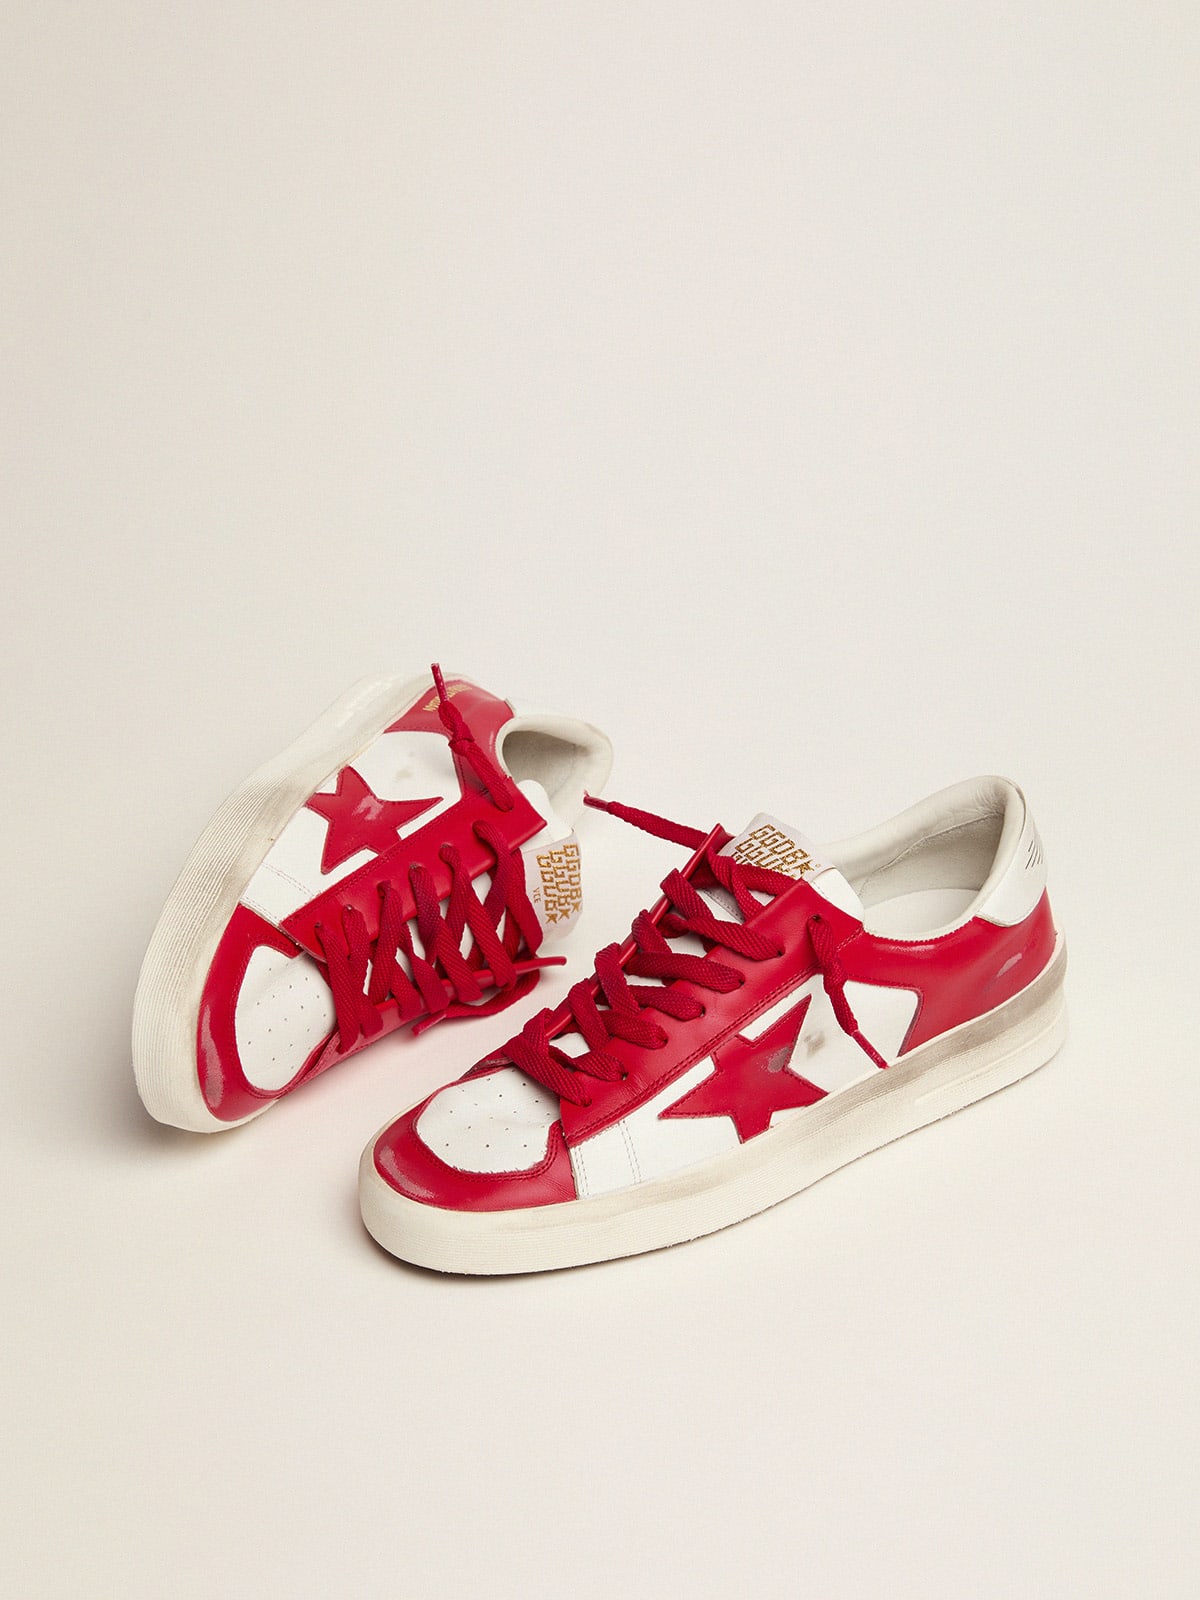 Golden Goose - Men’s Stardan sneakers in red and white leather in 